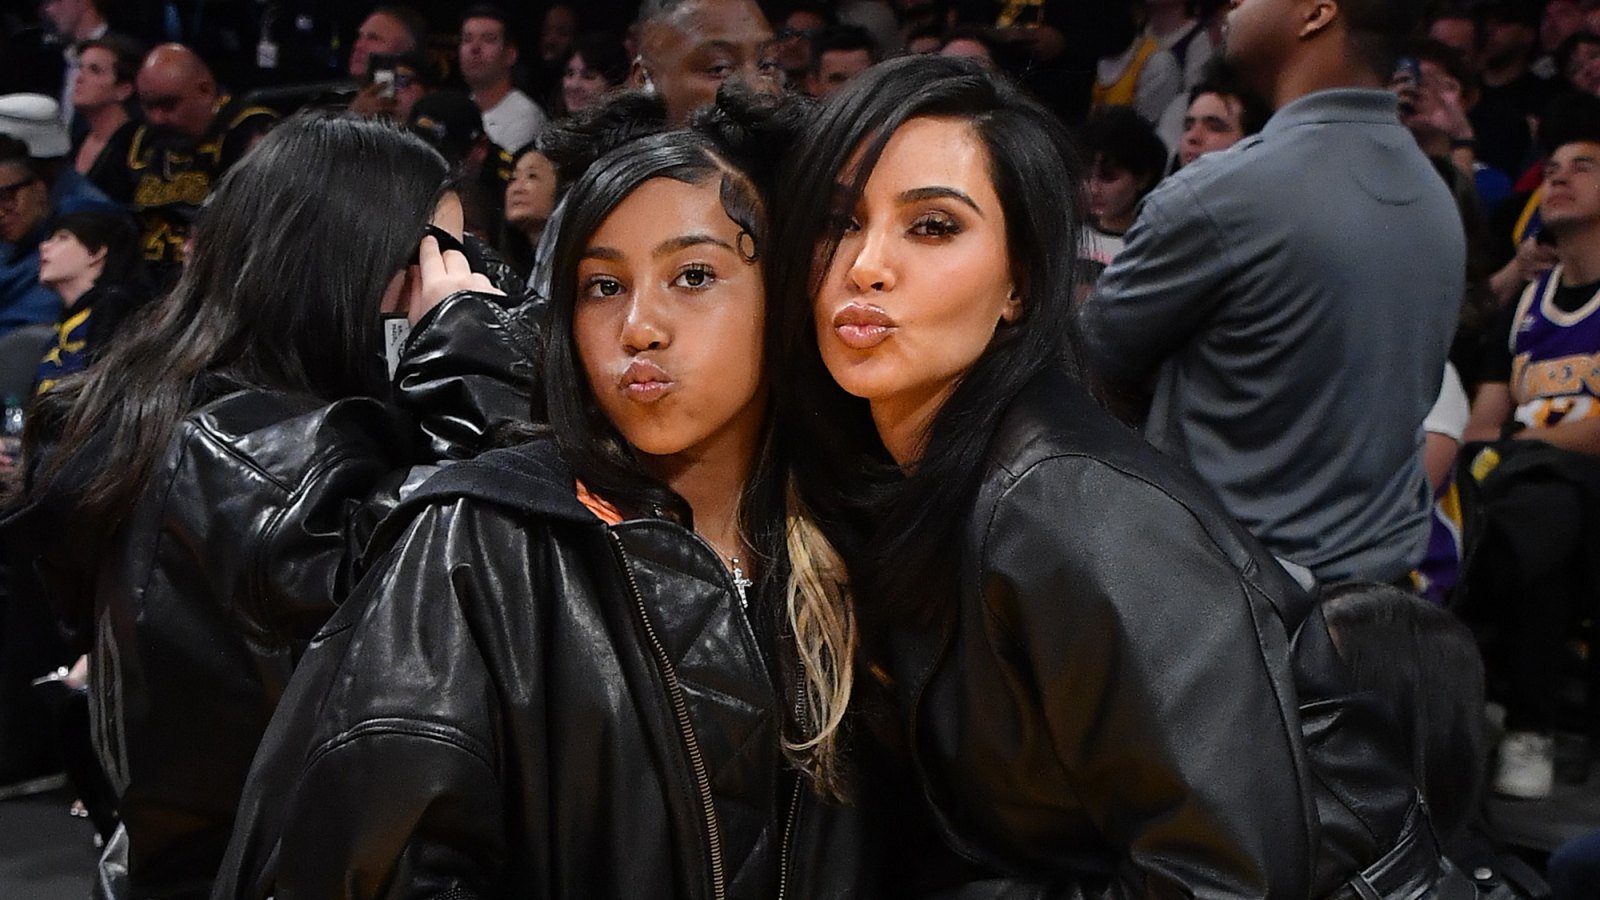 Kim Kardashian Was 'So Impressed' by Daughter North's 'Remarkable' Job During 'Lion King' Concert